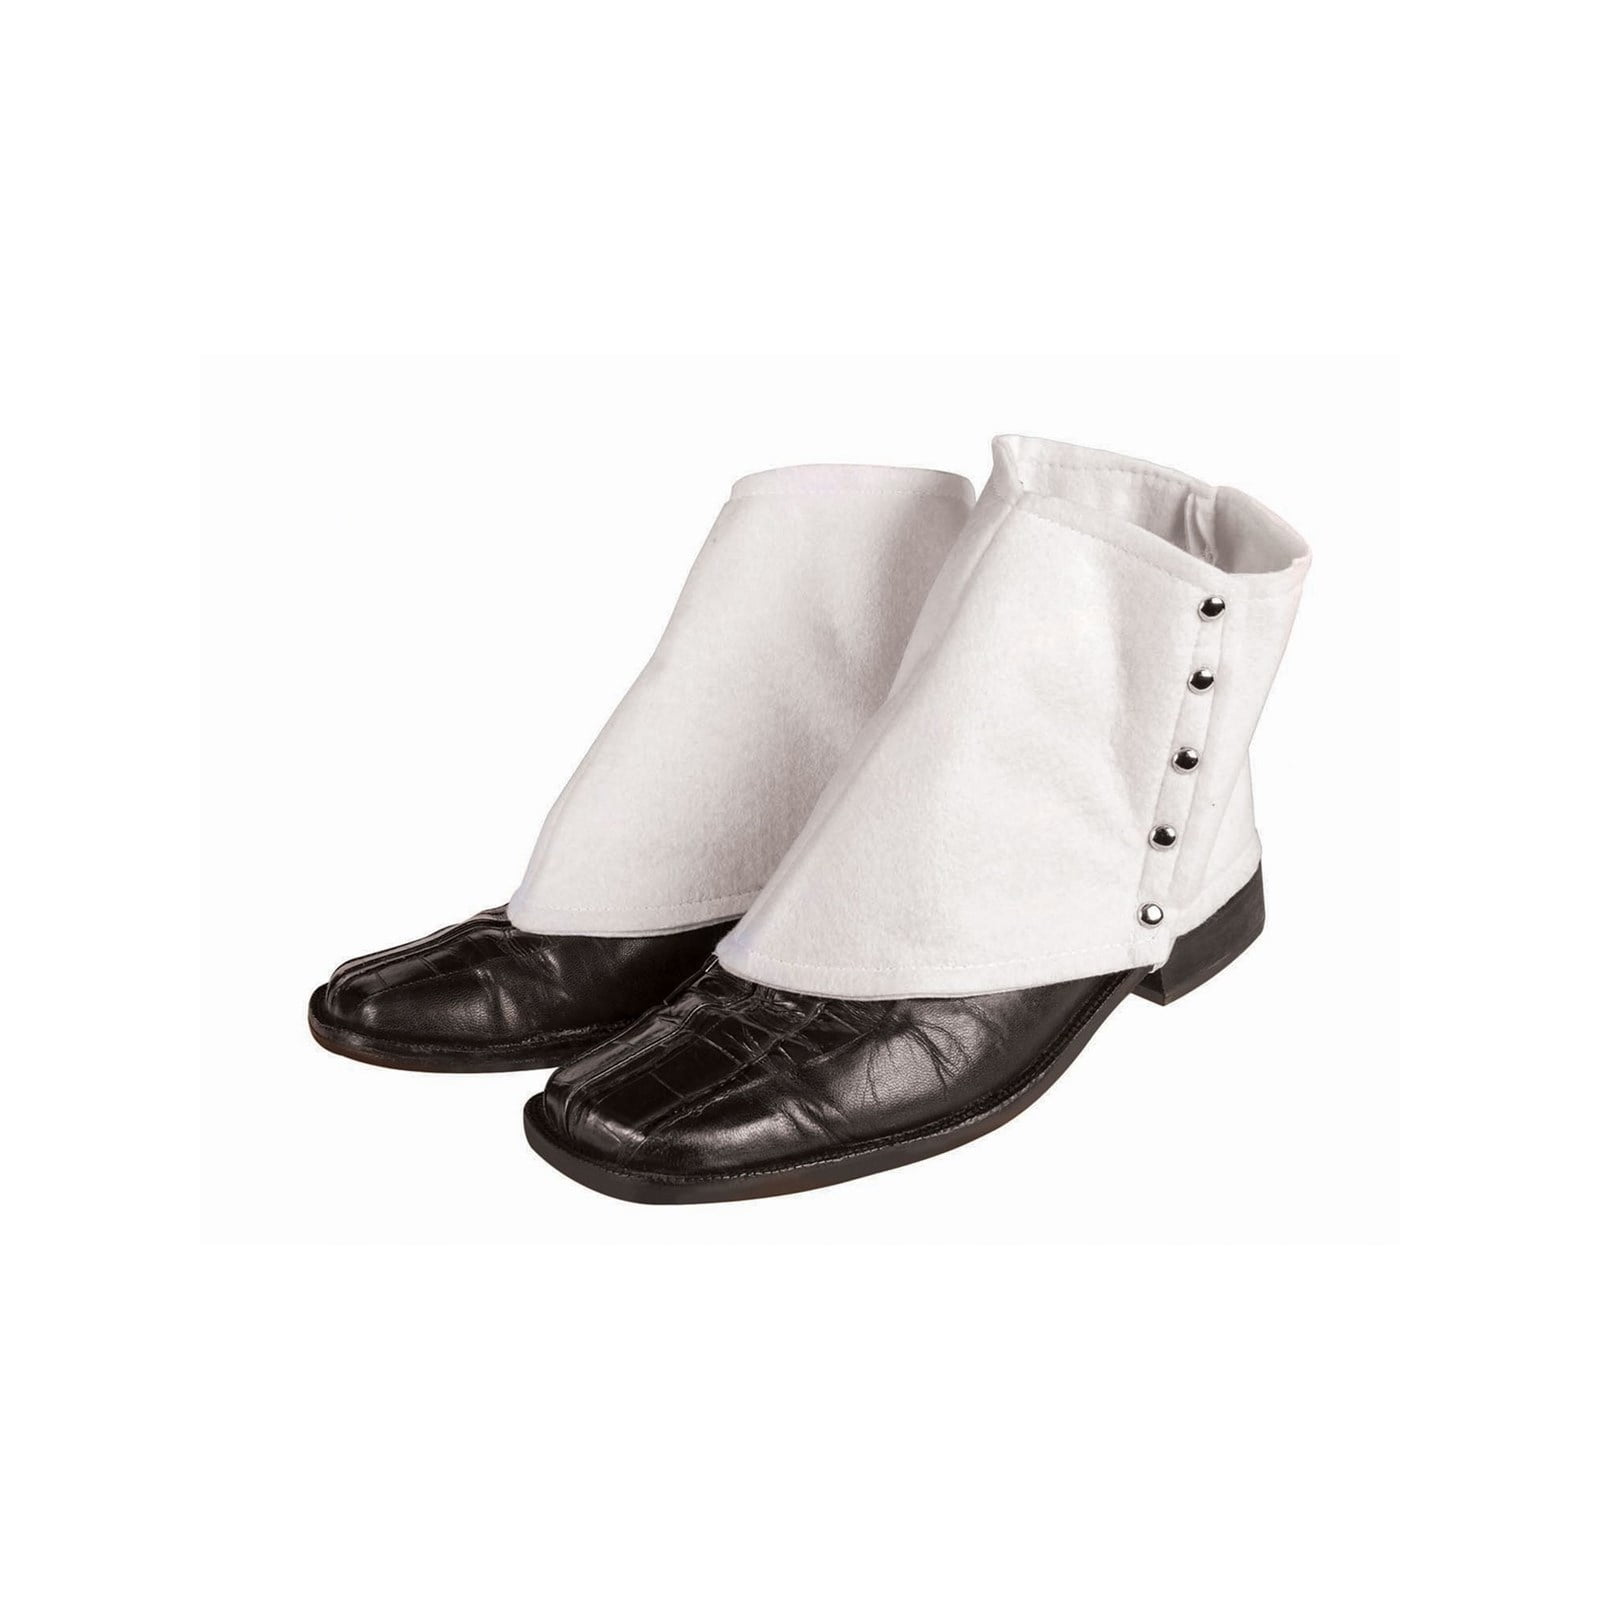 Spats - White Shoe Covers Mens Costume Accessory Adult Victorian Roaring 20s Gatsby" original "Spats - White - Walmart.com